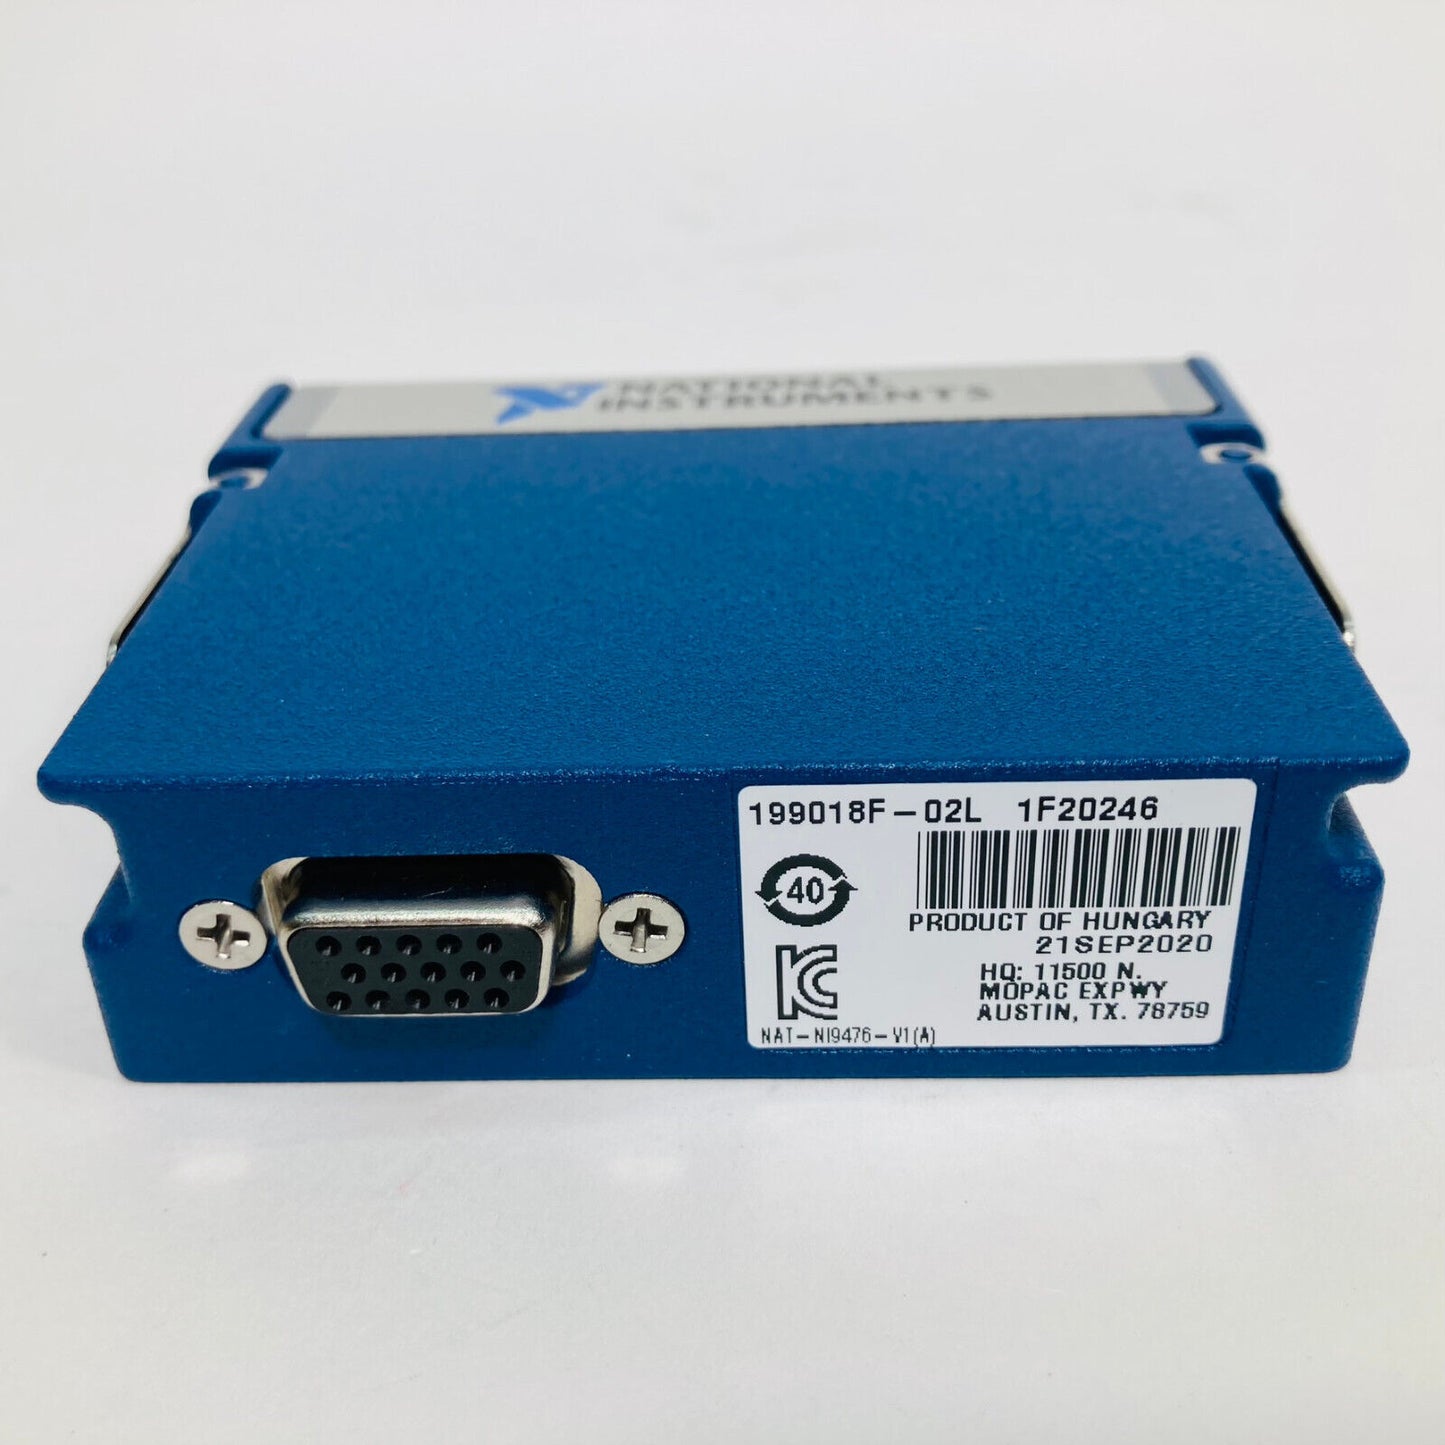 NEW National Instruments NI-9476 Sourcing Digital Output Module 32-Channel